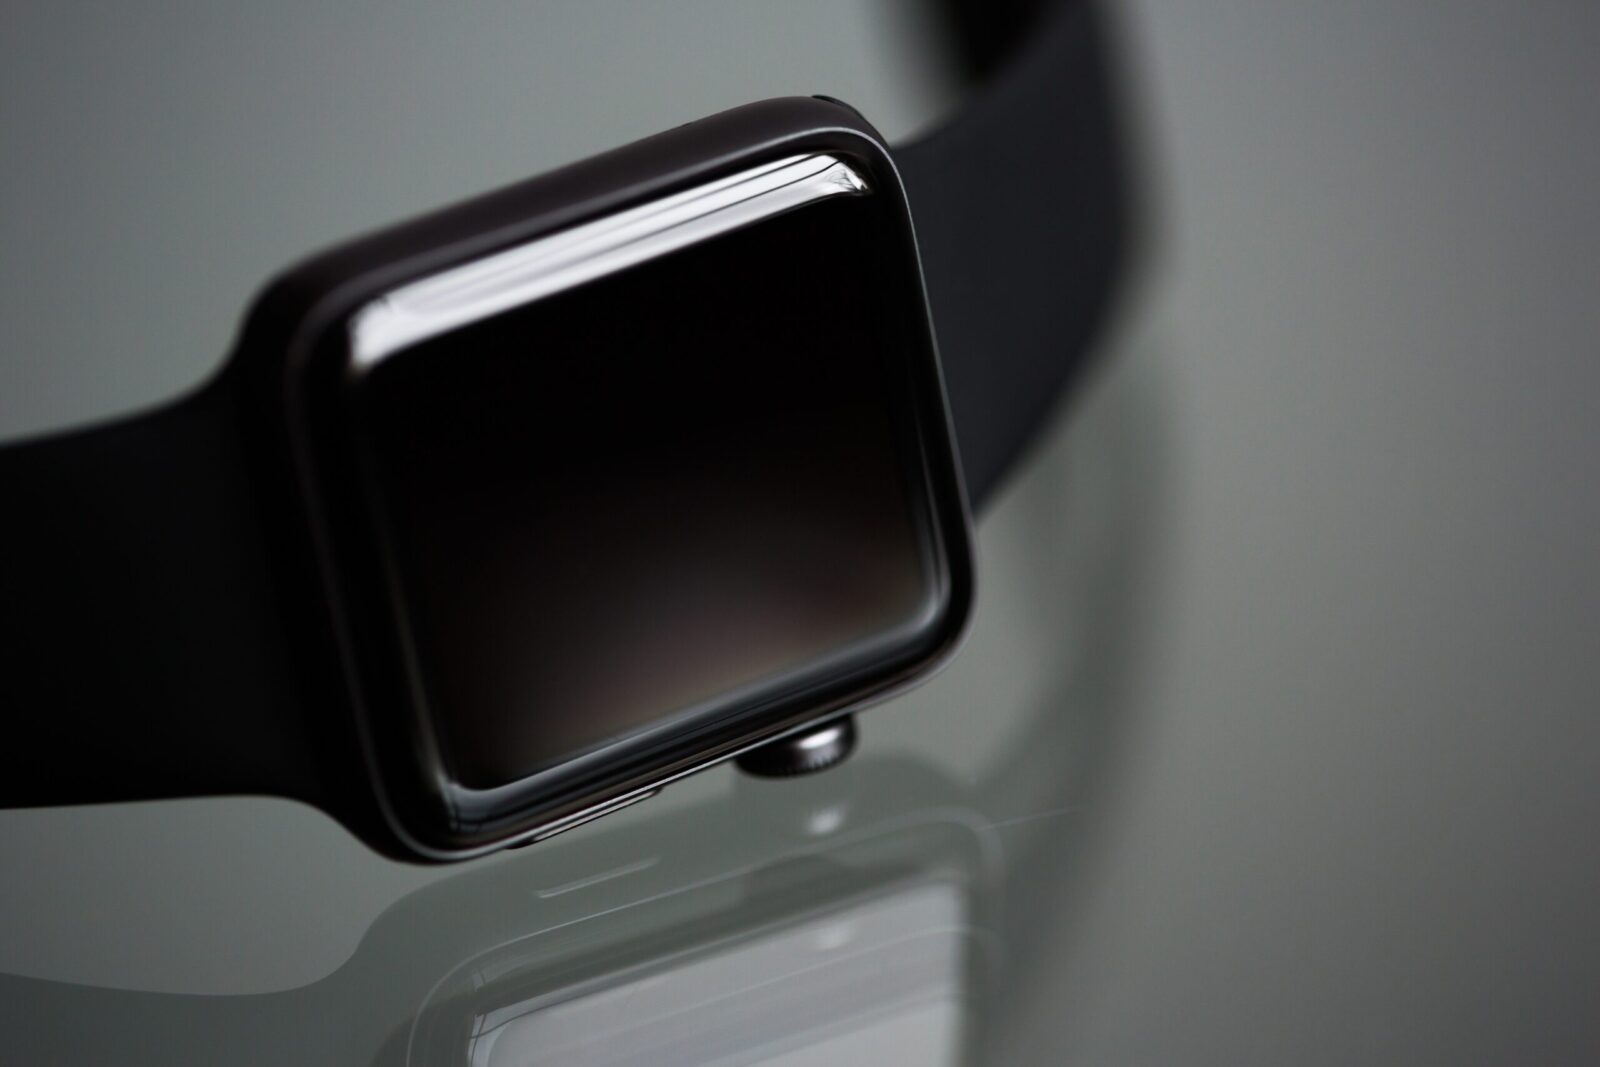 Can You Watch Netflix on Apple Watch?